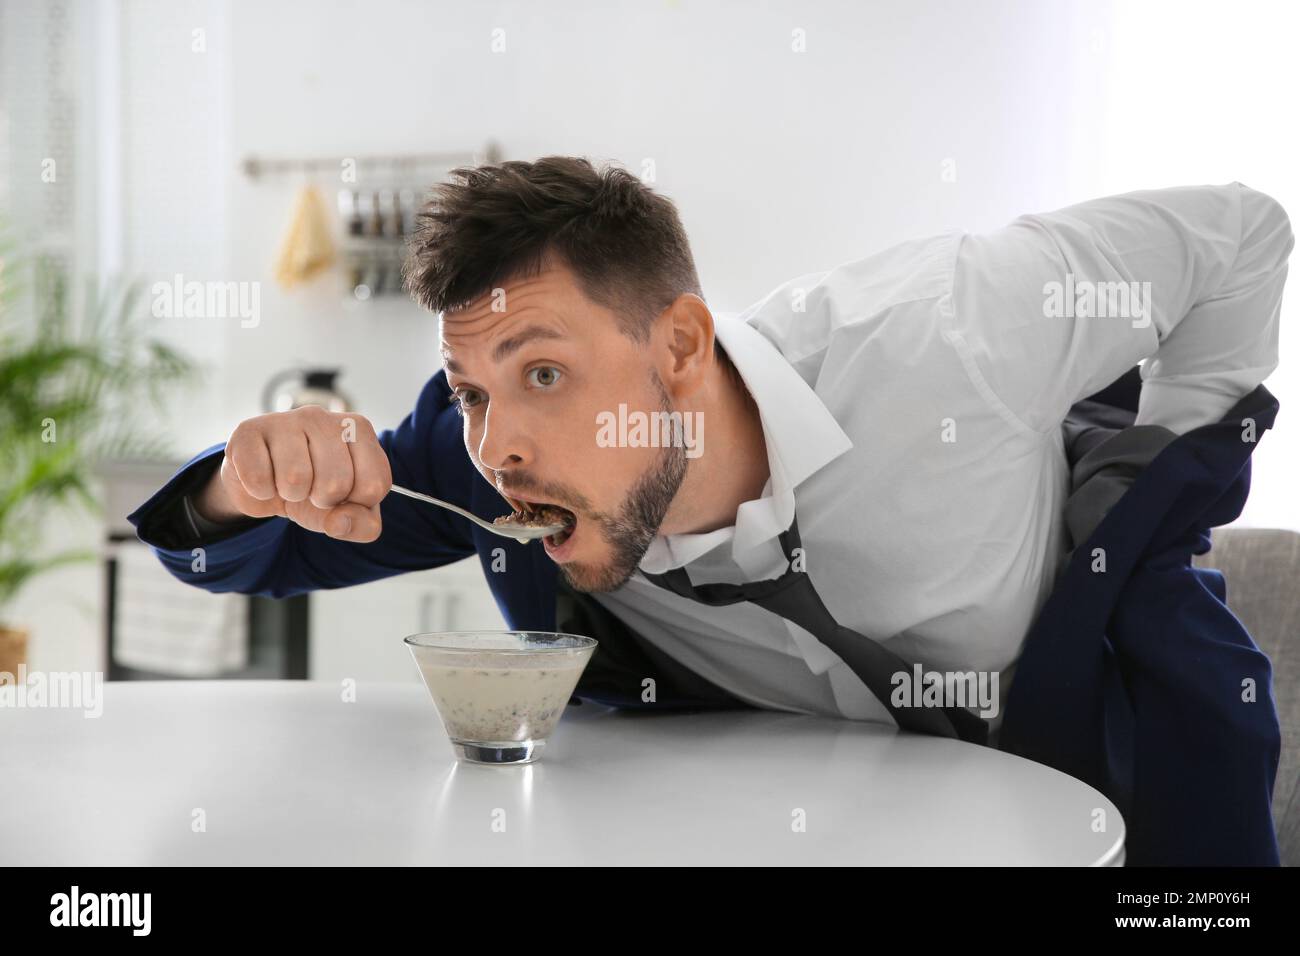 Man eating breakfast in hurry at home. Morning preparations Stock Photo